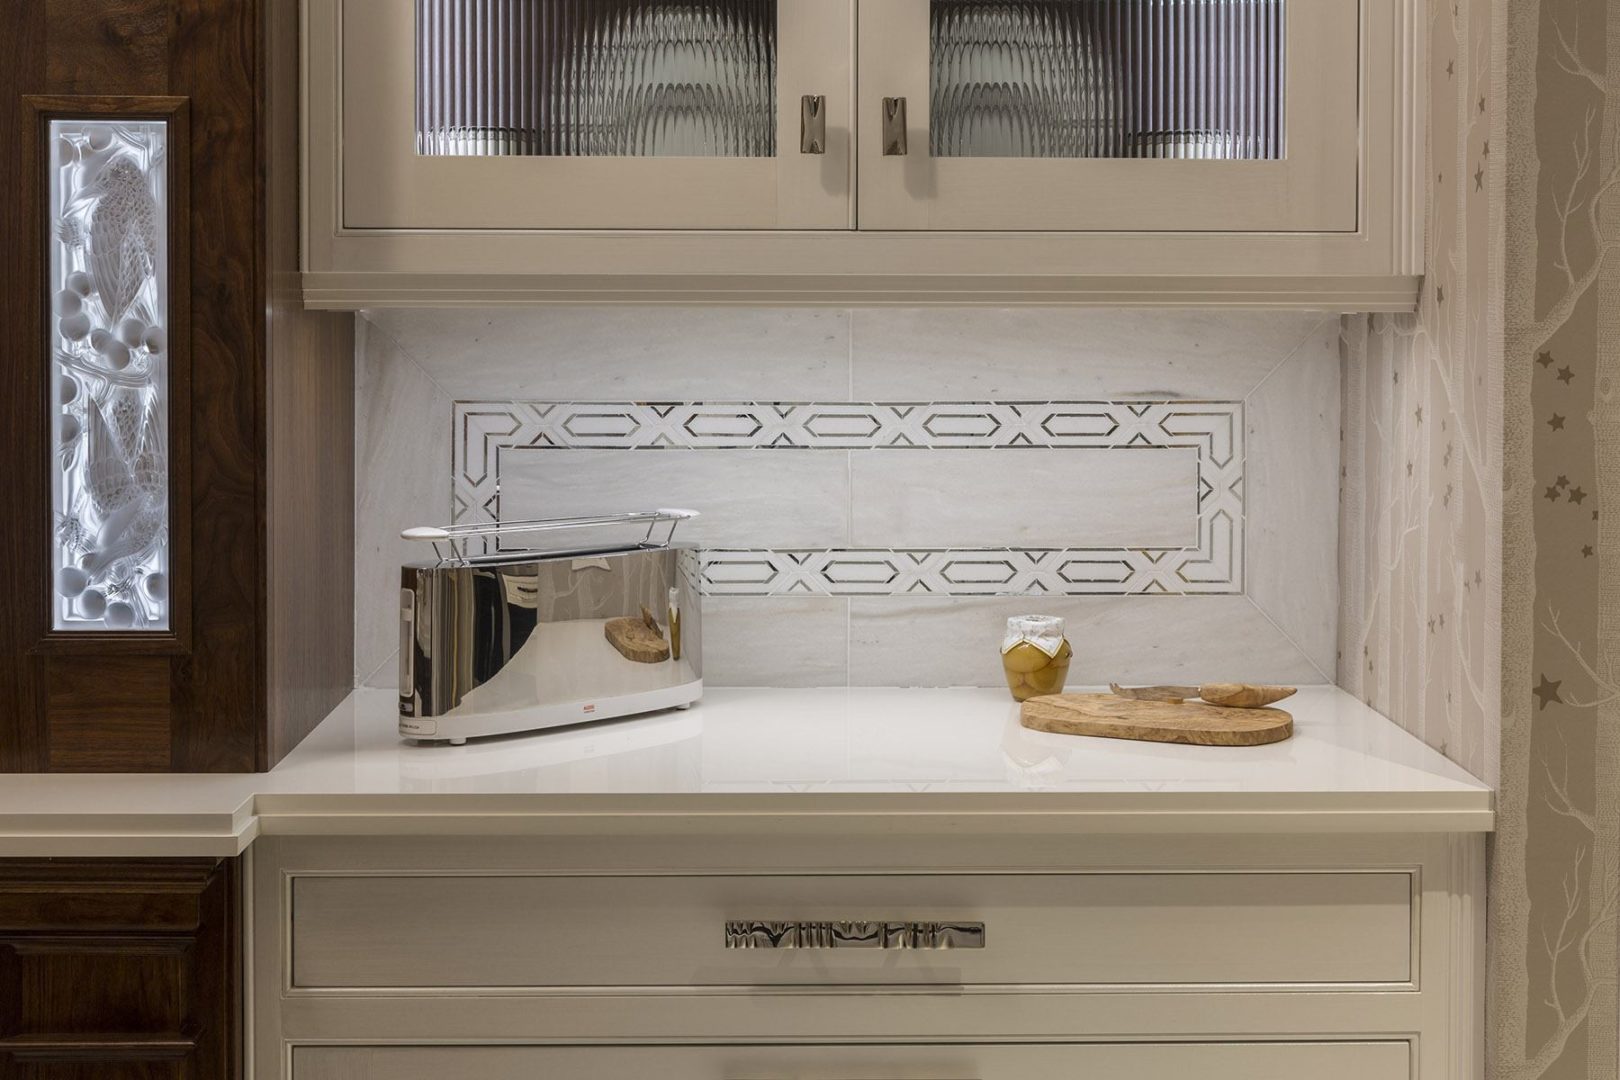 AKDO's White Haze marble and Allure radiance silver mirror border create sophisticated backsplash alongside warm wood cabinetry by Clive Christian and genuine Lalique crystal backlit inset panels.